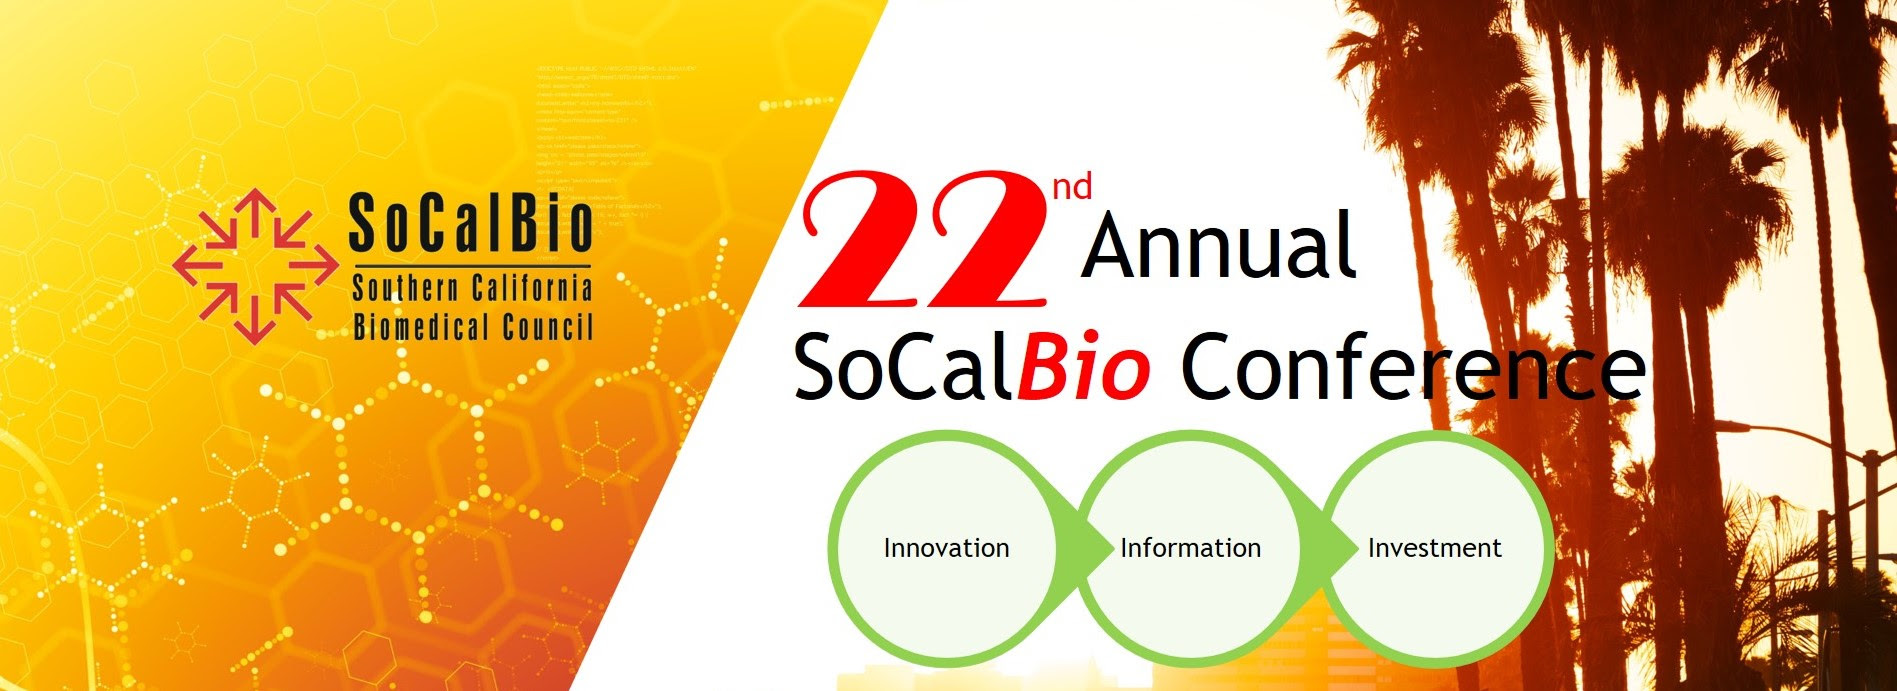 Biodesigns selected to present at 2020 SoCalBio Conference for innovative prosthetic socket HiFi Socket